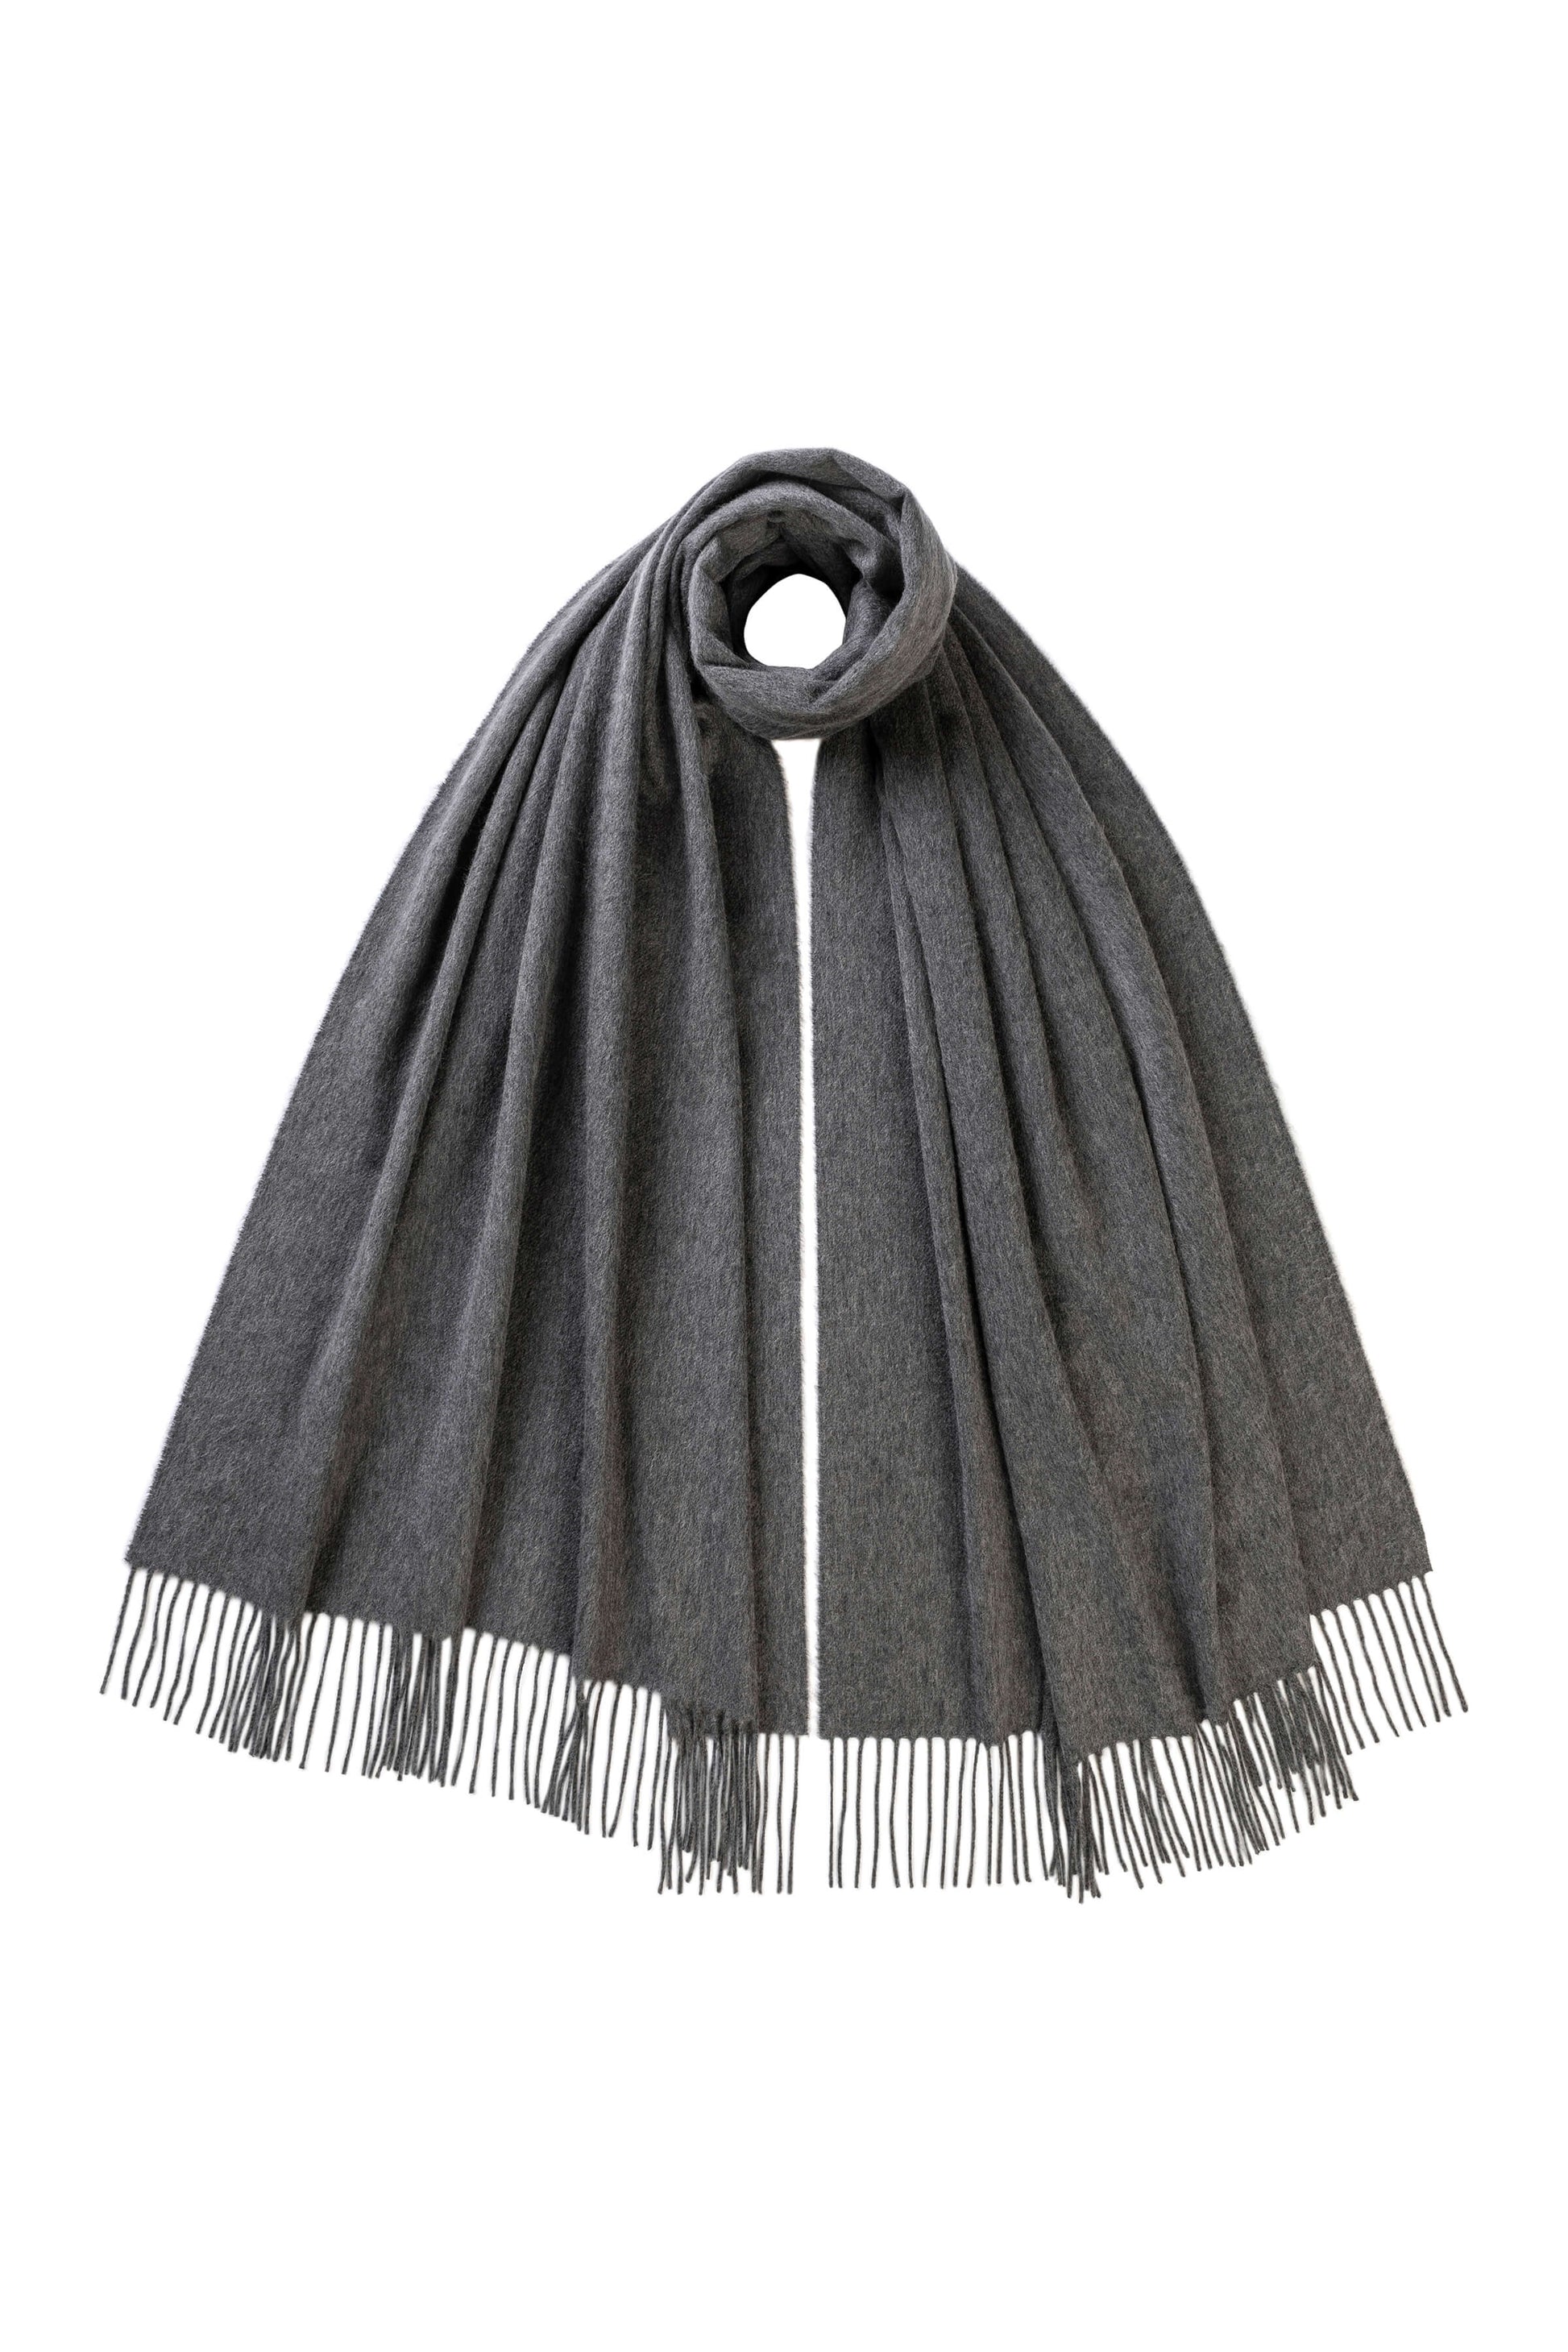 Johnstons of Elgin 100% Cashmere Stole in Mid Grey on a white background WA000056HA0501N/A